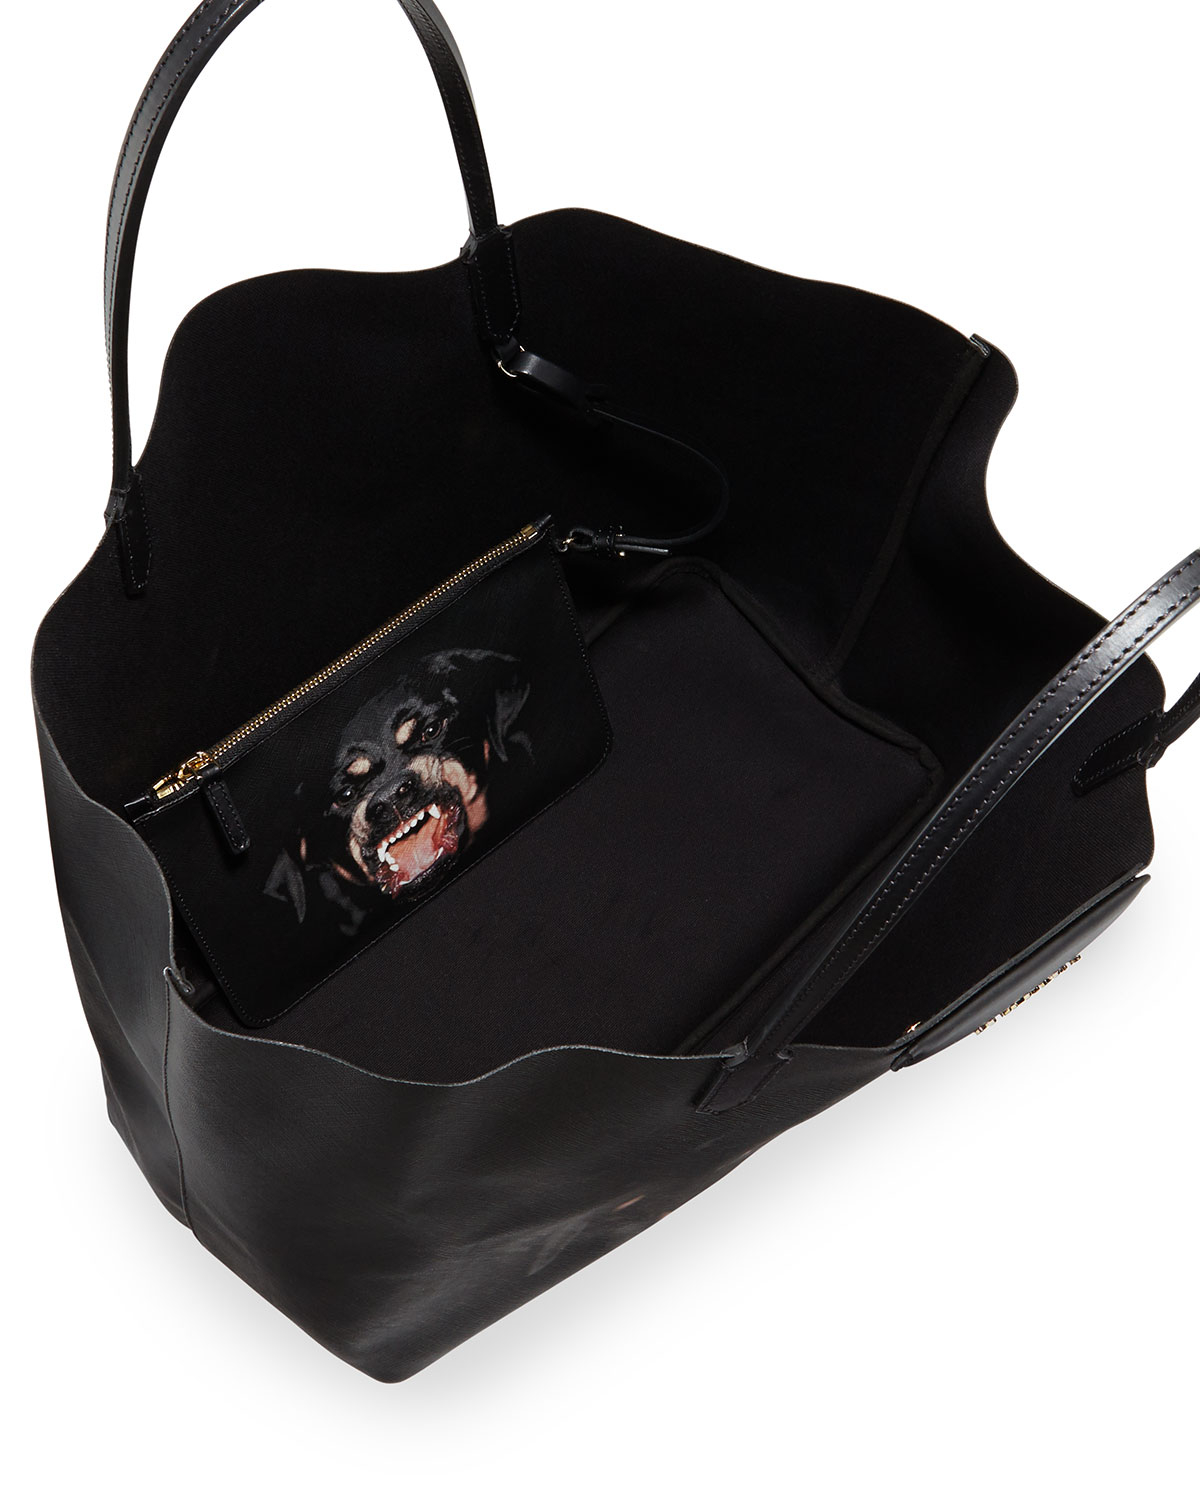 Lyst - Givenchy Antigona Large Coated Canvas Shopping Tote Bag in Black